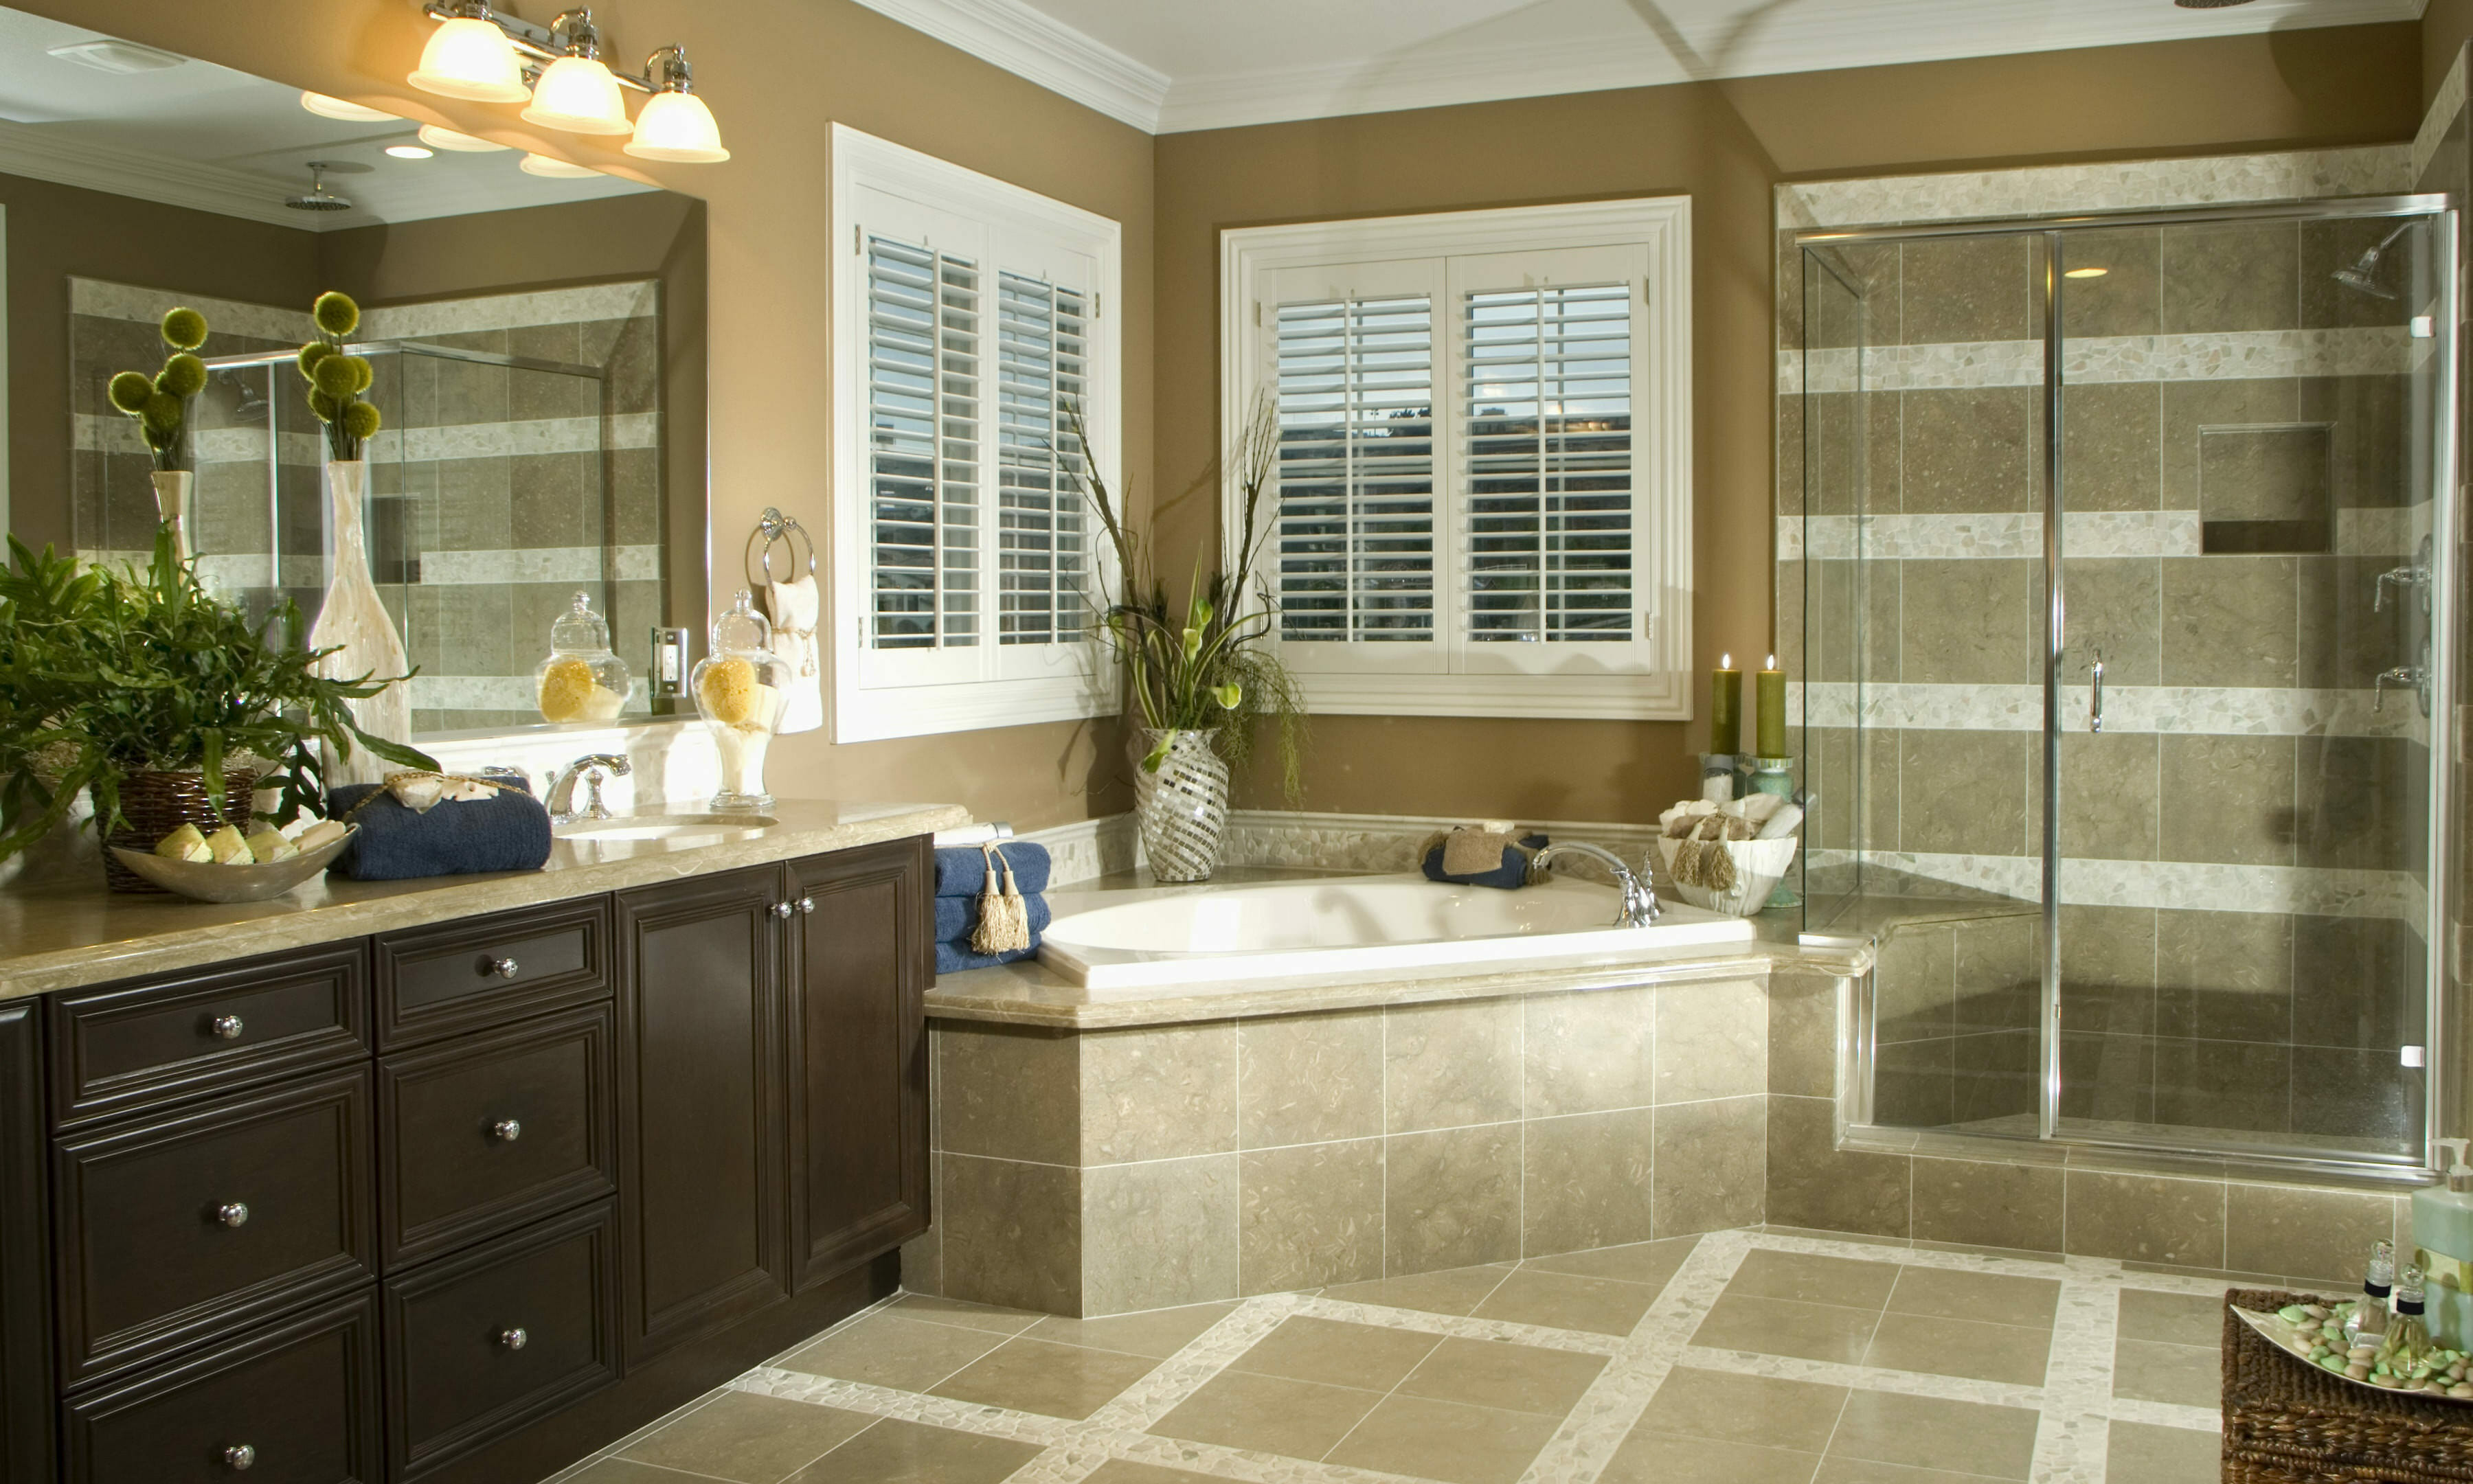 Bathroom Remodel Cost in San Diego County, Ca.